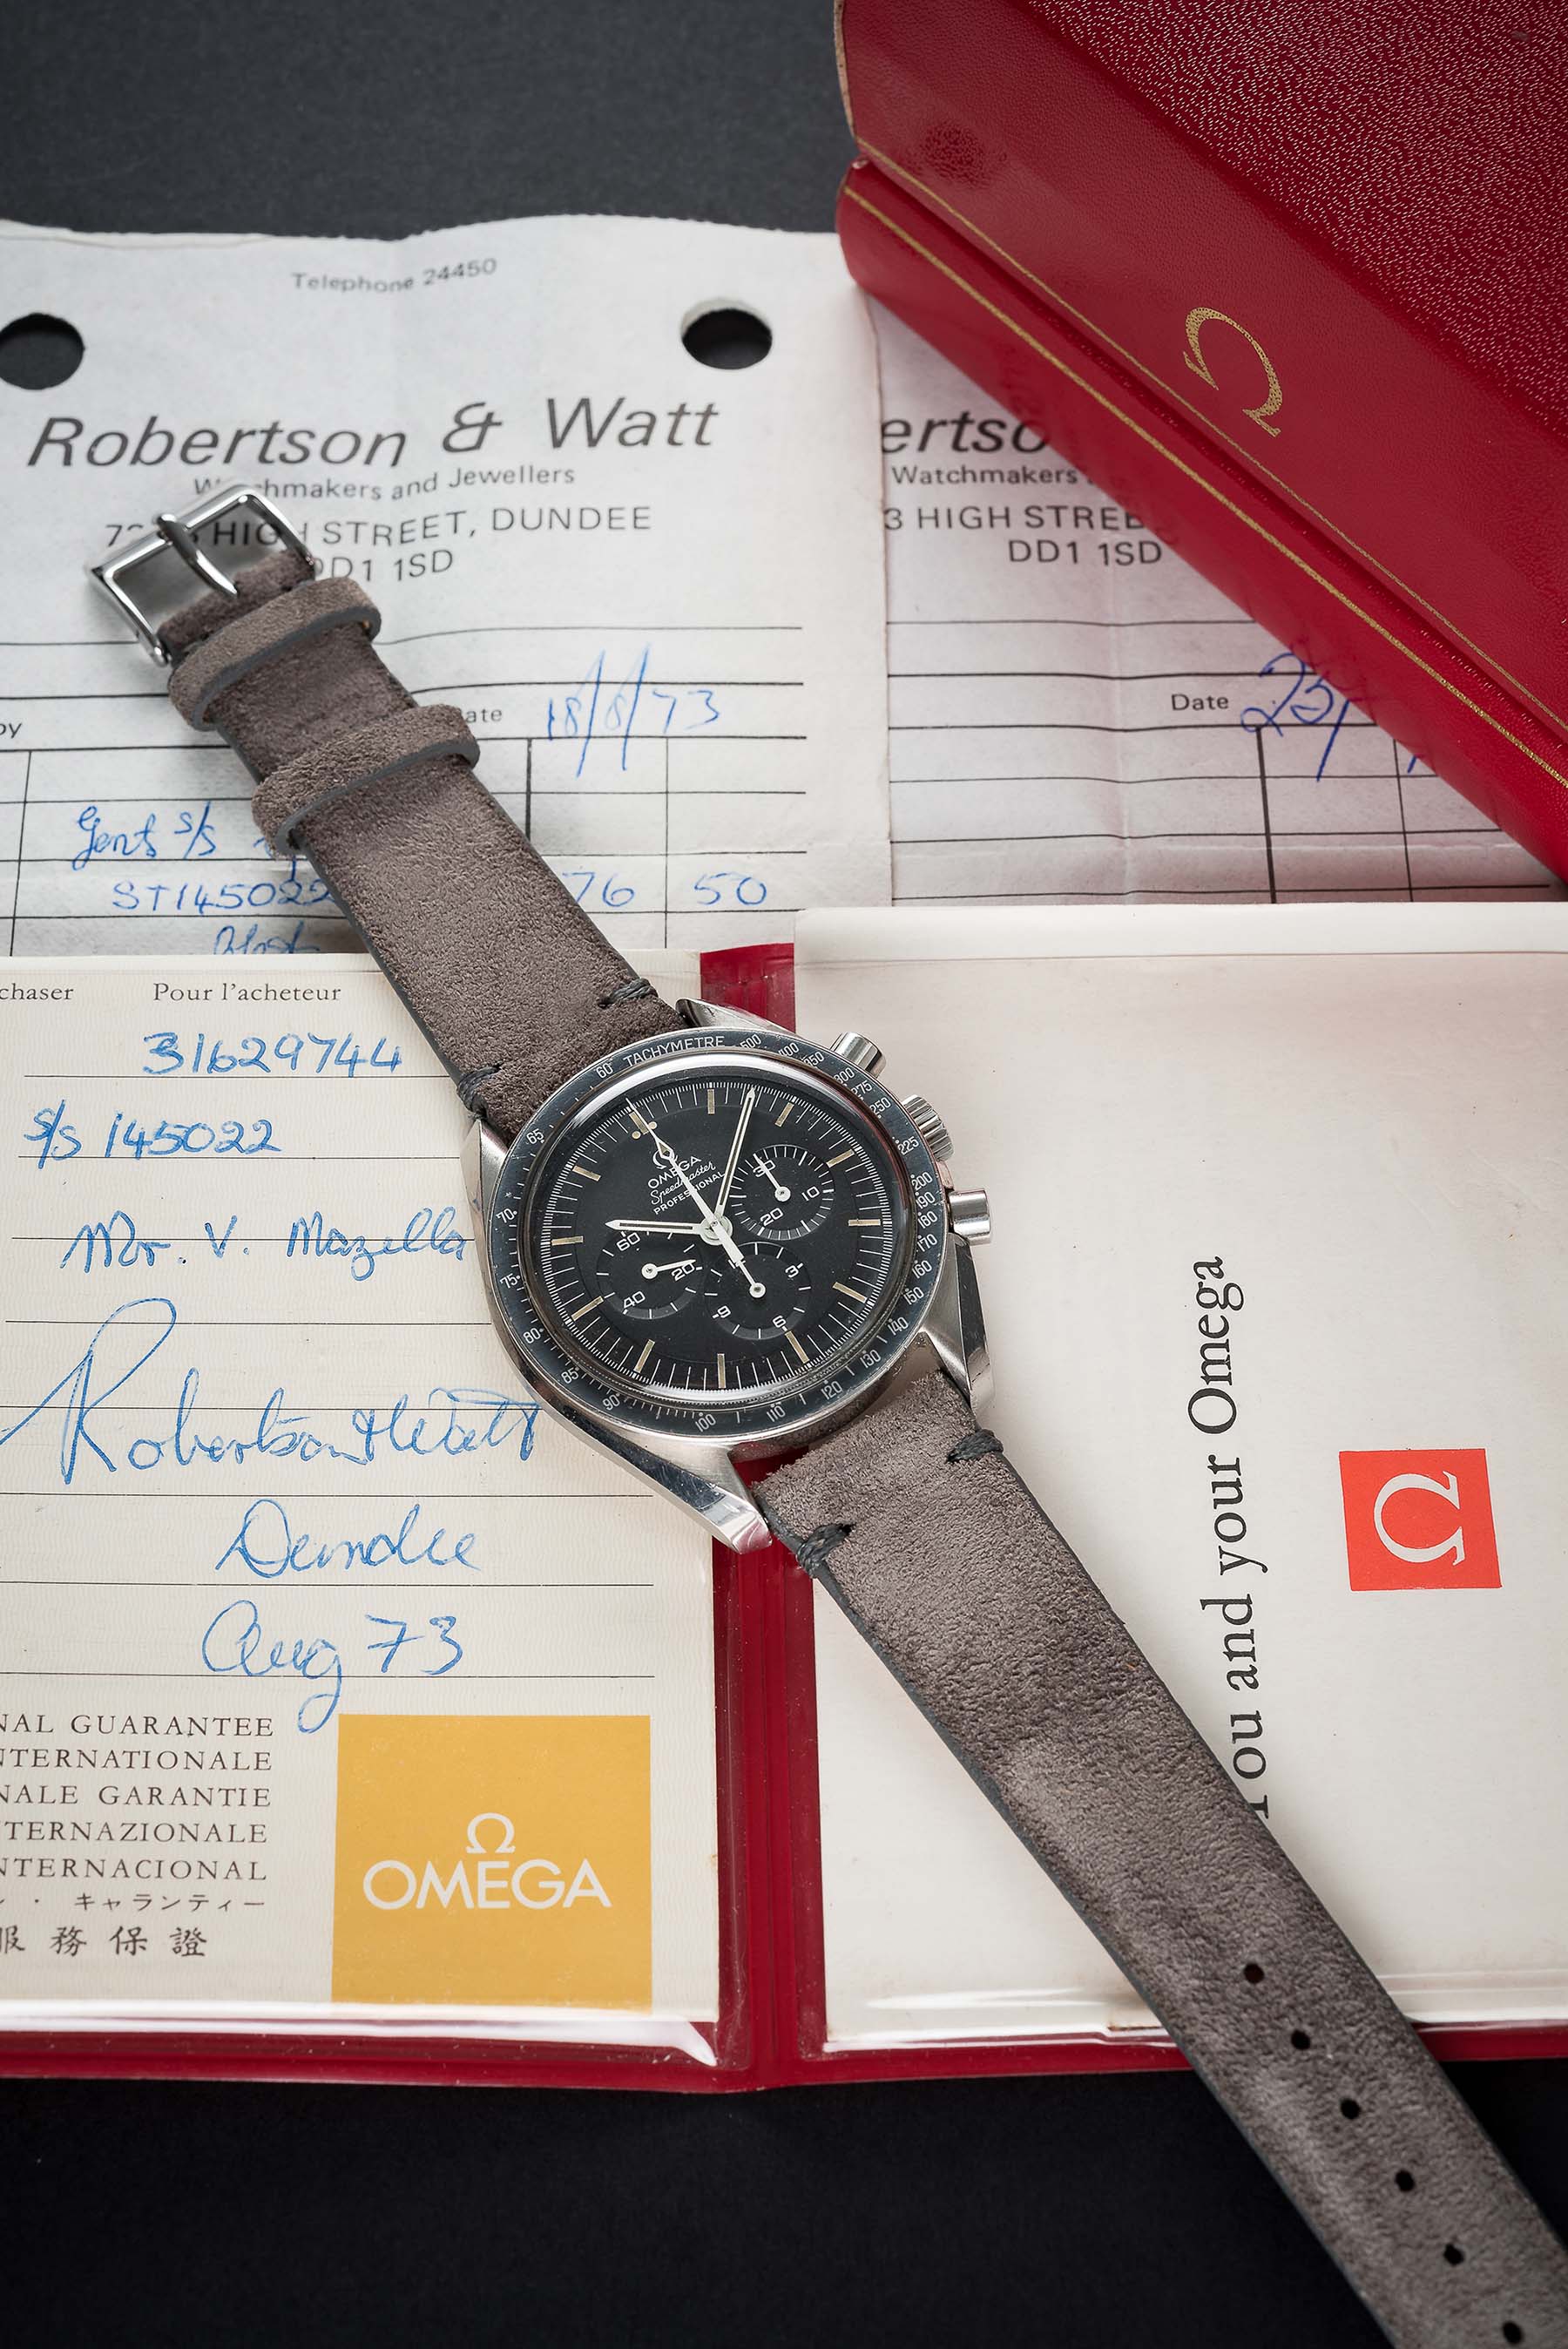 A RARE GENTLEMAN'S STAINLESS STEEL OMEGA SPEEDMASTER PROFESSIONAL CHRONOGRAPH WRIST WATCH DATED - Image 3 of 12